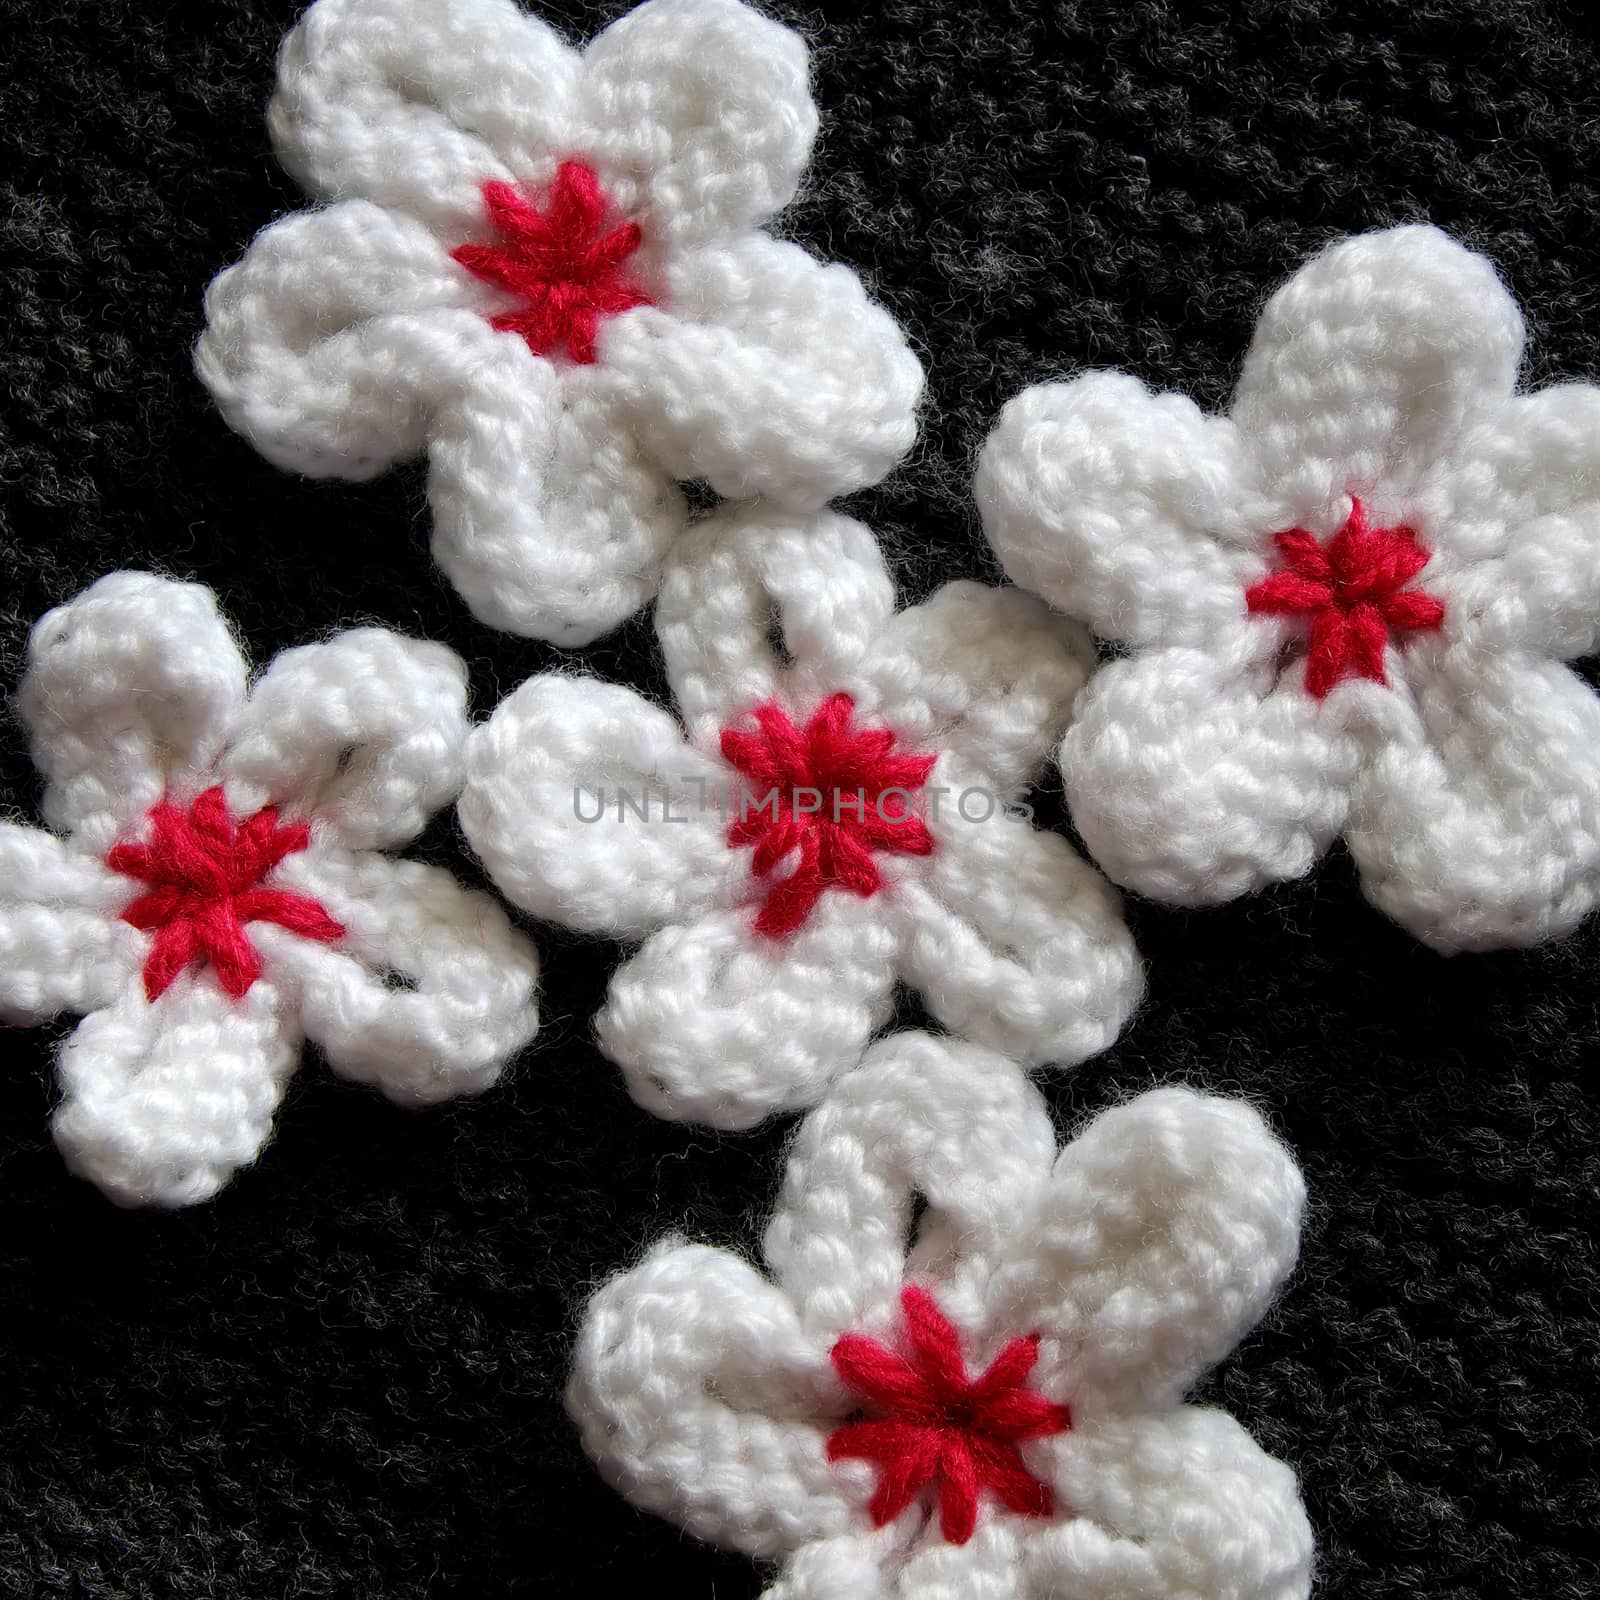 knit daisy flower on wool background by xuanhuongho